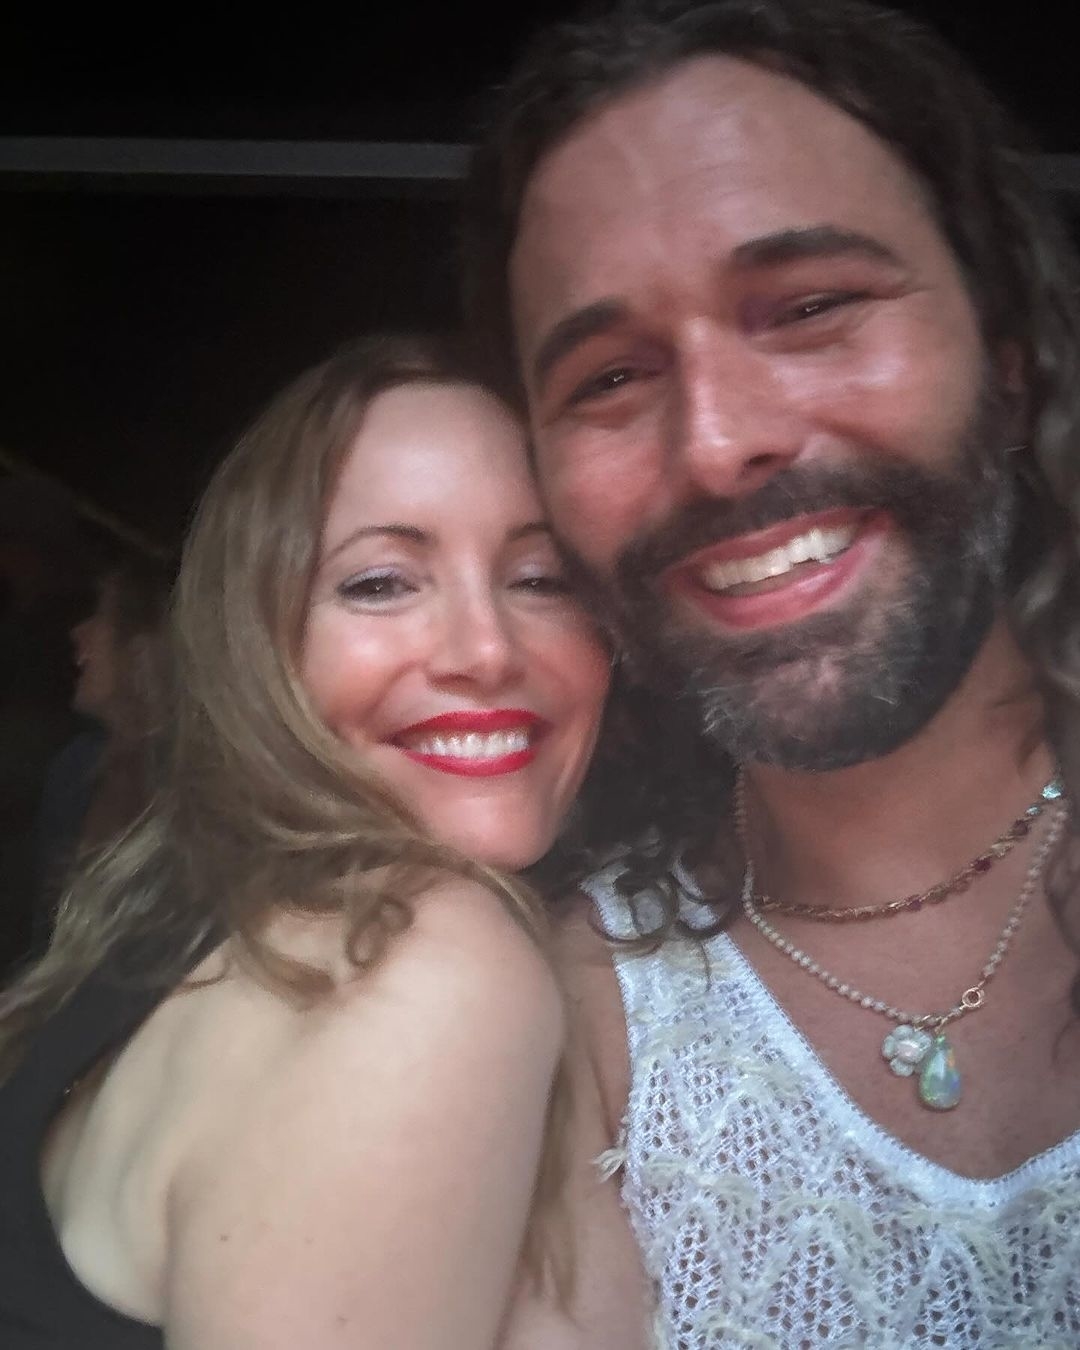 Leslie Mann and Jonathan Van Ness smiling closely together in a casual setting